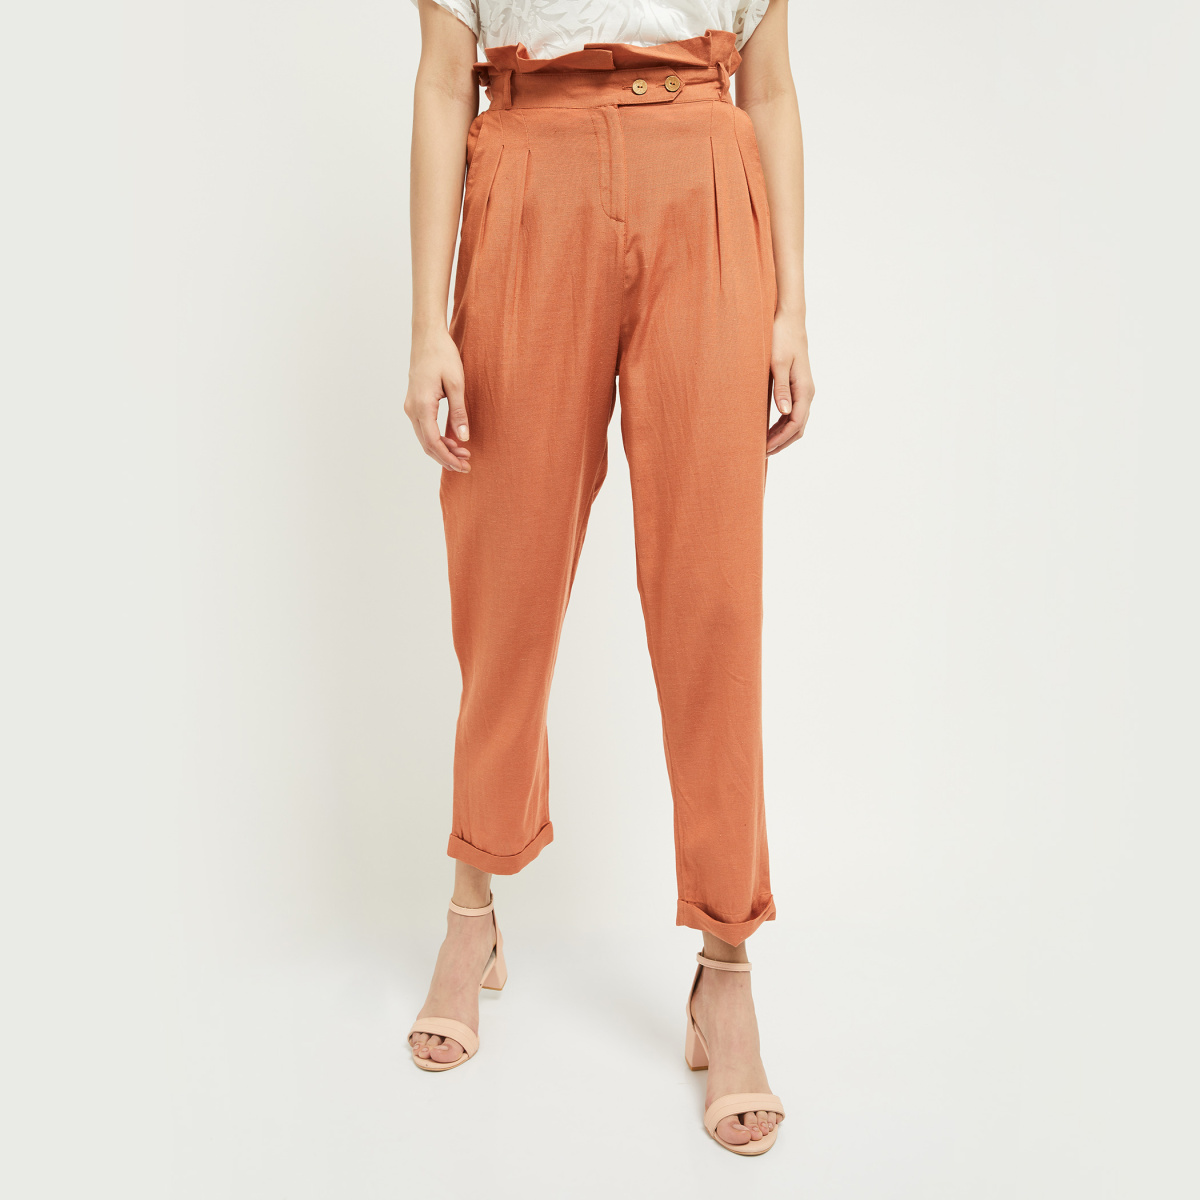 Buy Women's Slim Fit Red Color Peg Trousers at Radhella